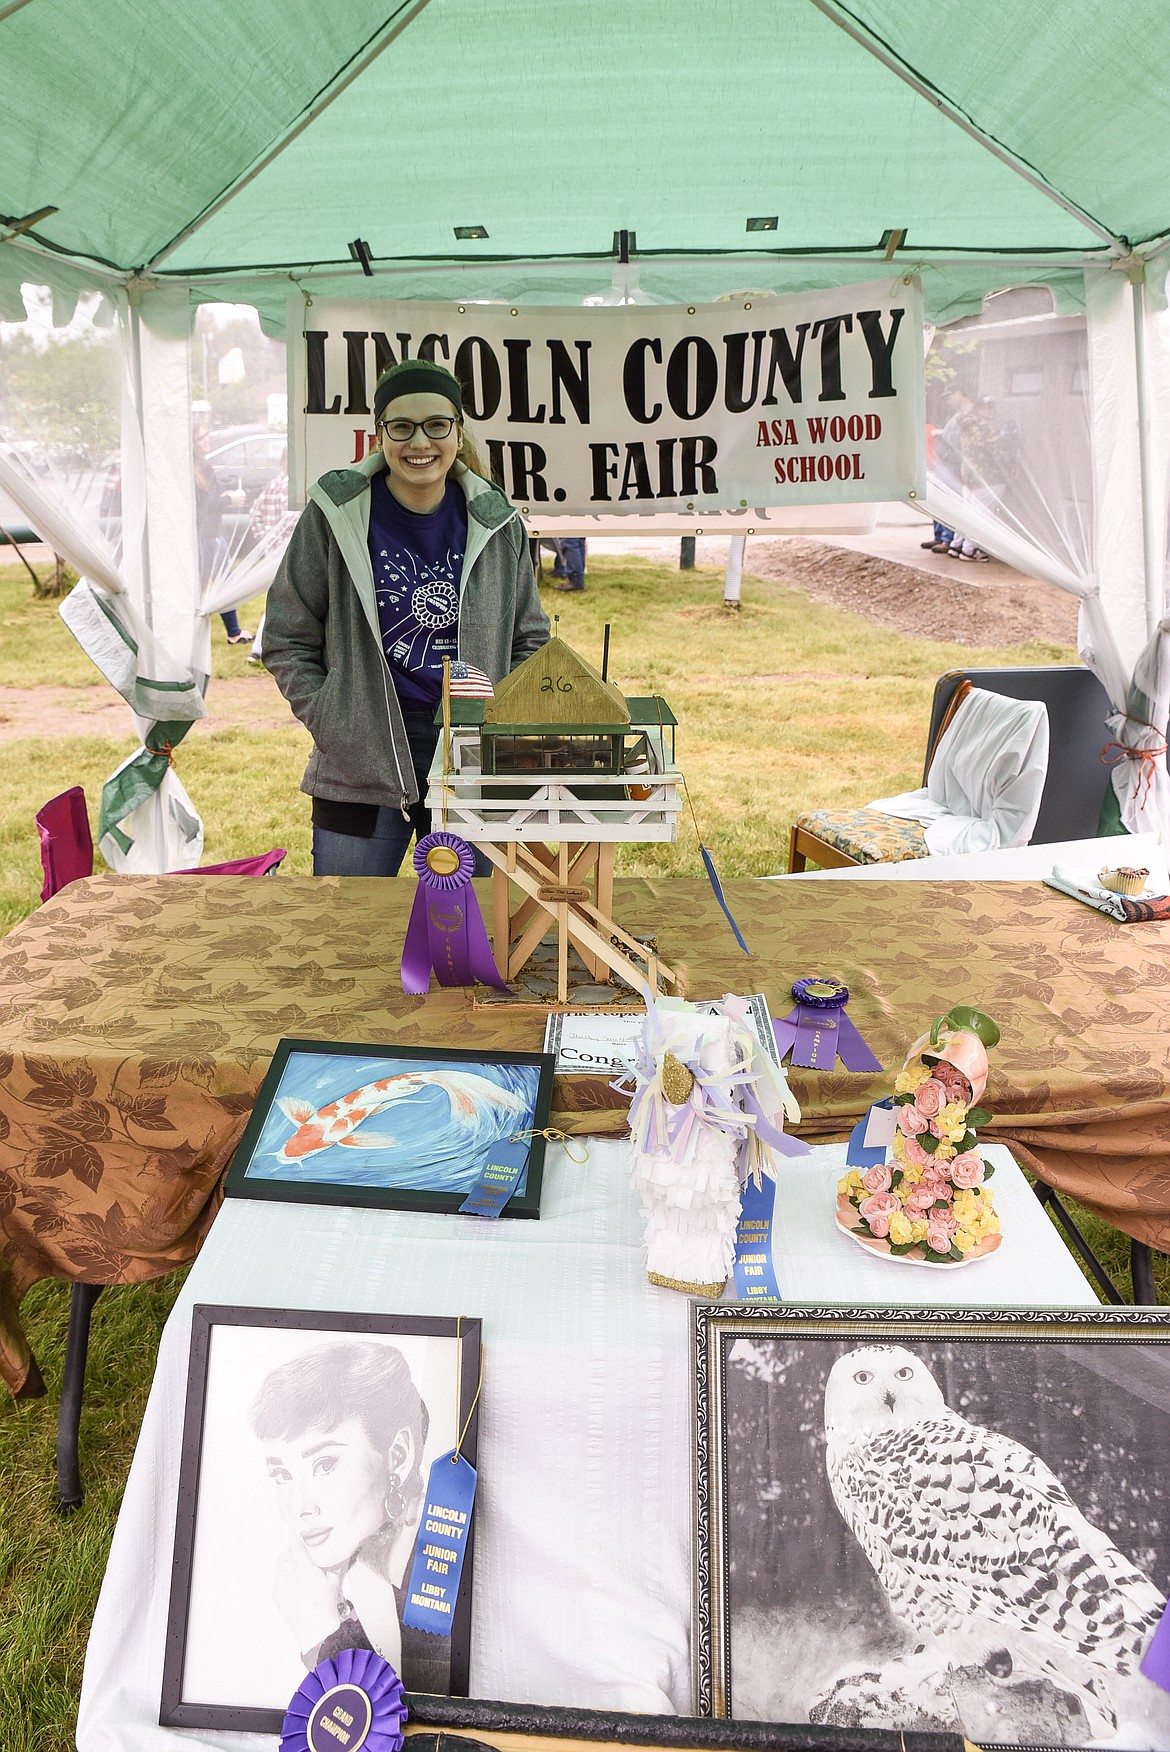 Shelby Smith, promoting the Lincoln County Junior Fair, poses among some of the many entries she has submitted over the past six years, at the Kootenai Kiwanis Family Fun Day at Fireman&#146;s Park in Libby last Saturday. &#147;I want to spread the fun and joy that I experience doing the fair with other kids,&#148; Smith said. (Ben Kibbey/The Western News)